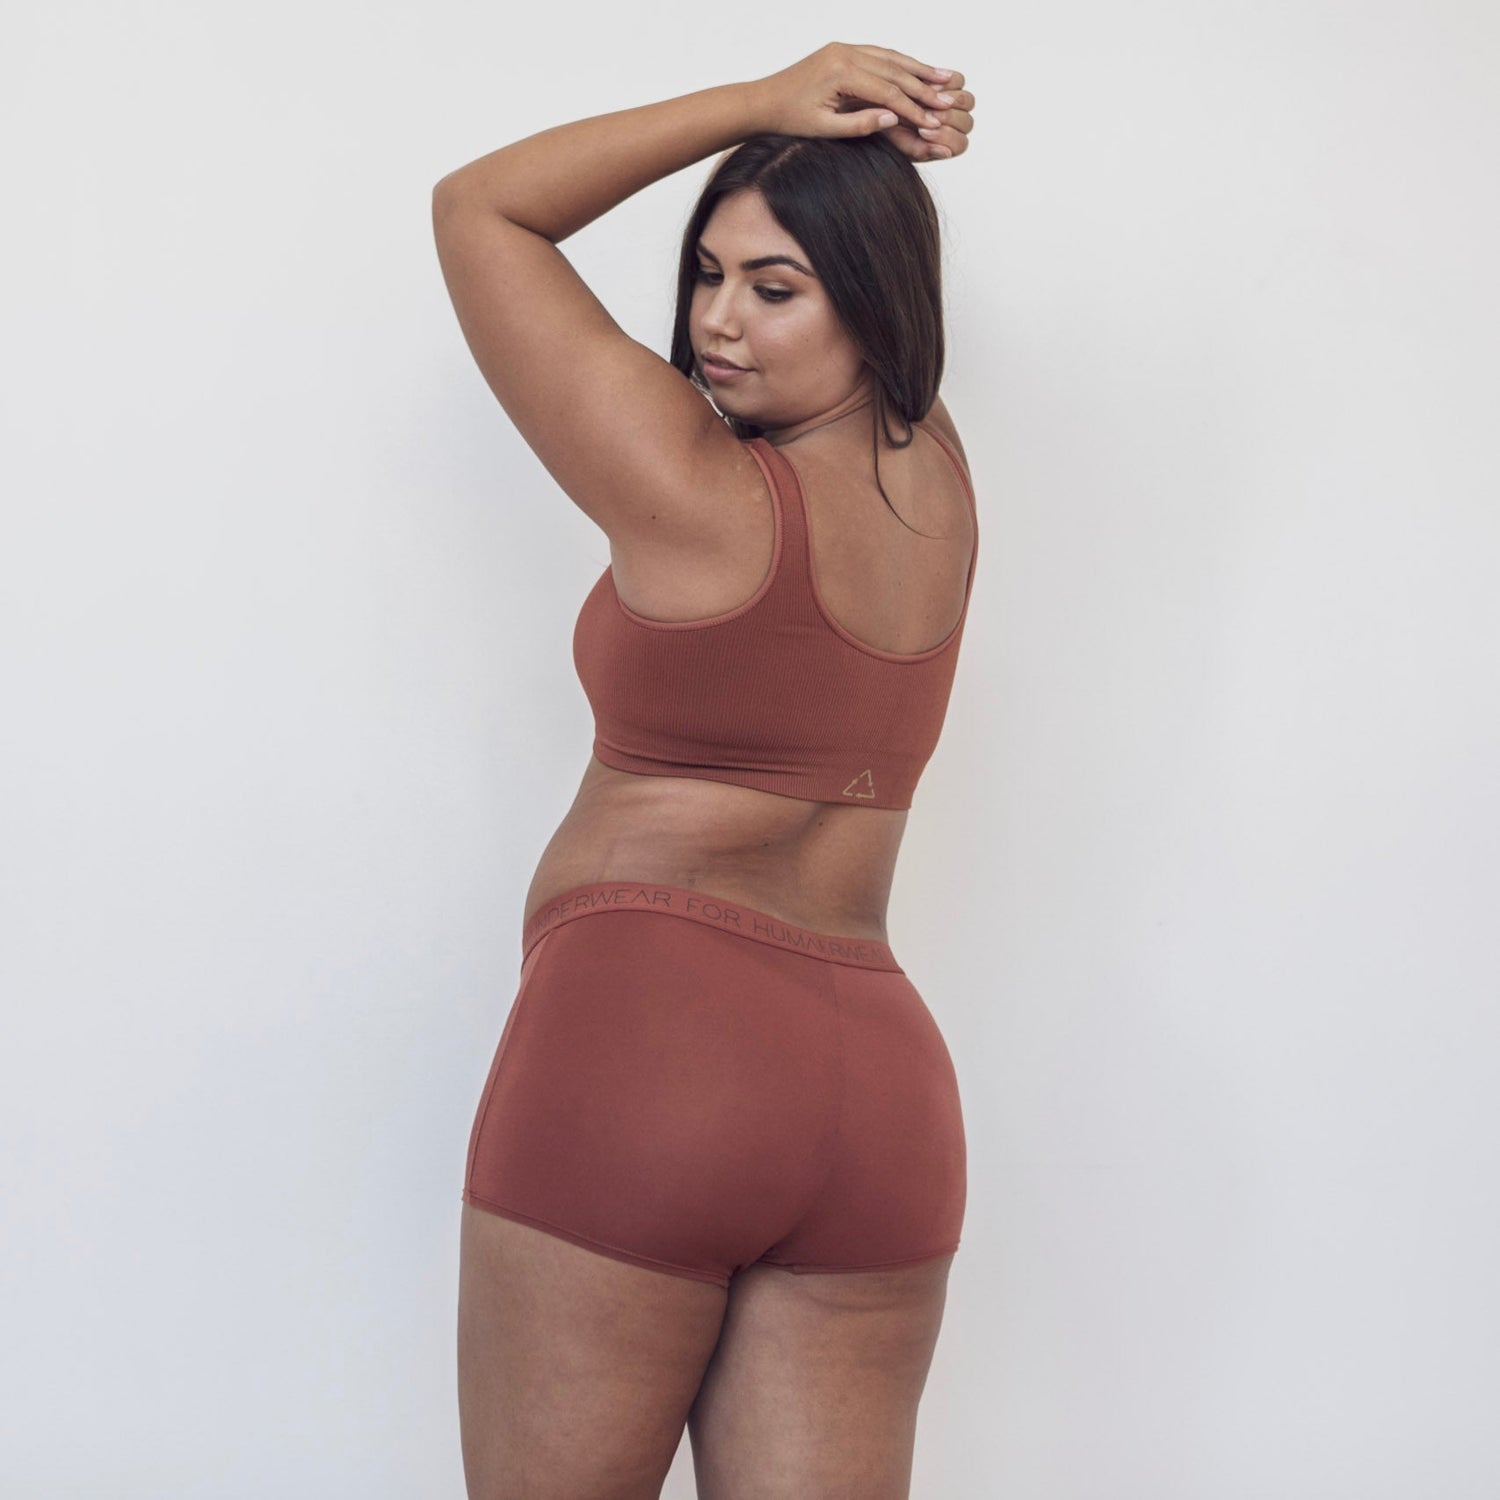 Comfy Shorts for Women - Underwear for Humanity